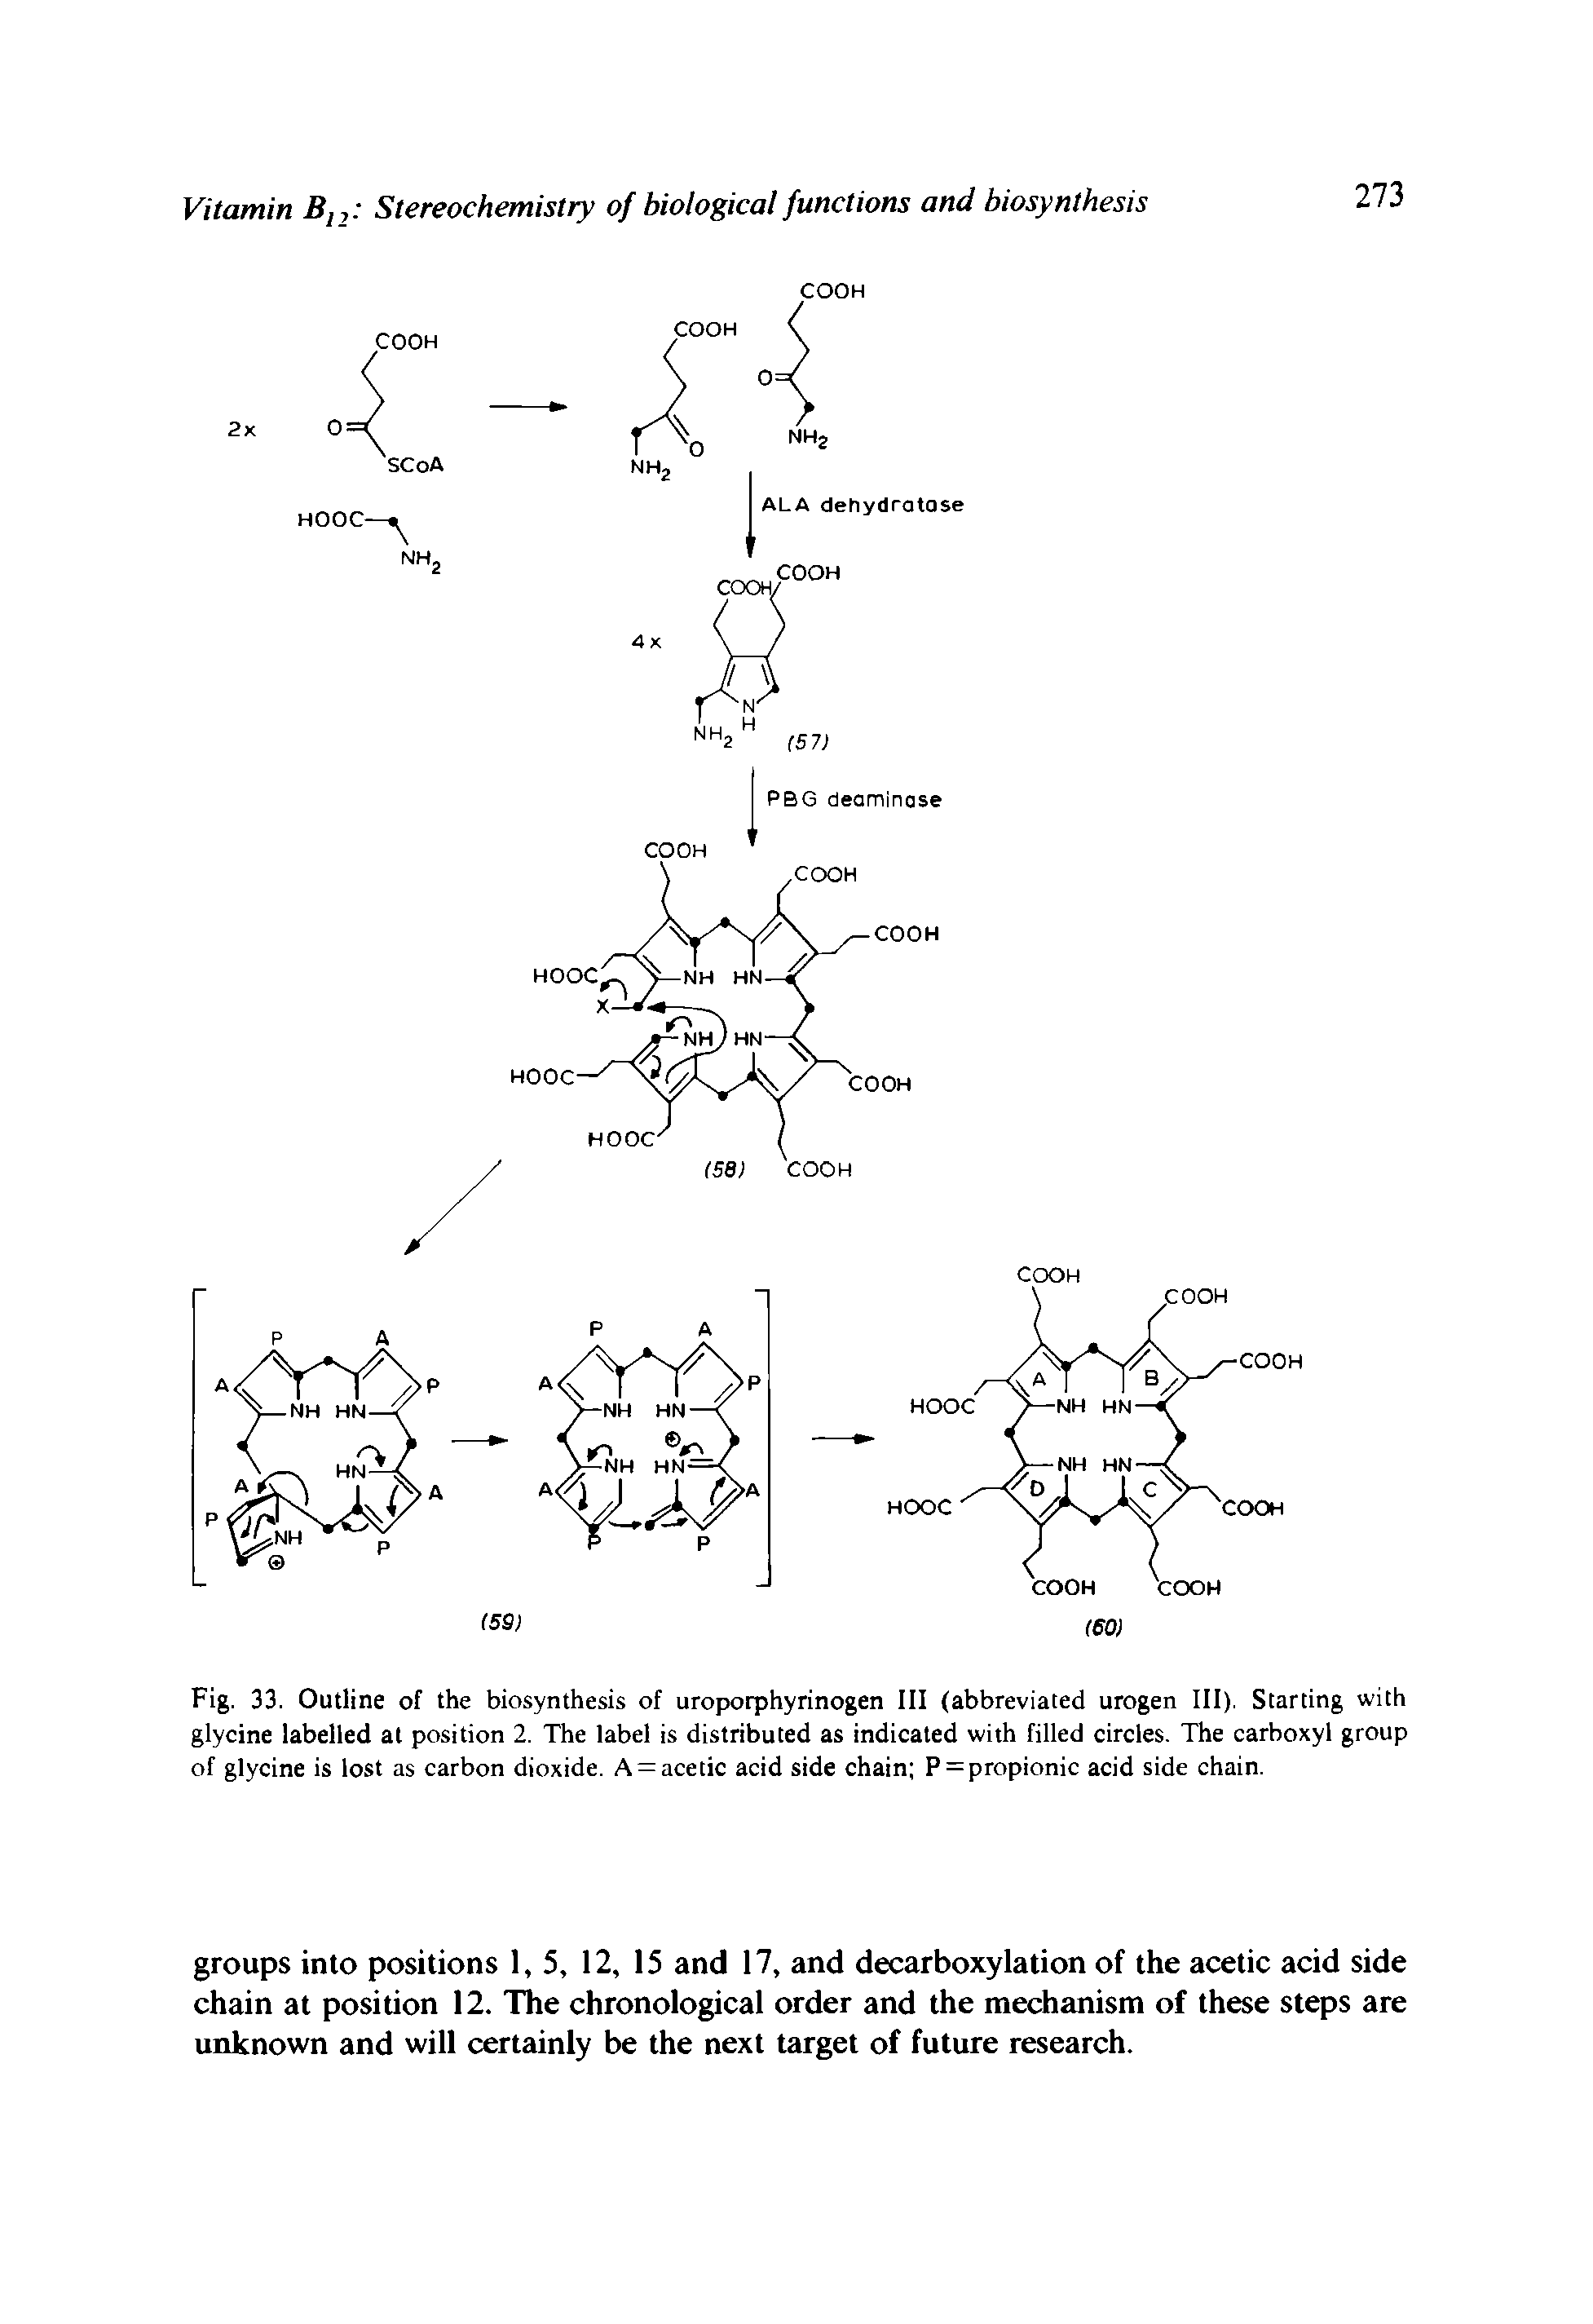 Fig. 33. Outline of the biosynthesis of uroporphyrinogen III (abbreviated urogen III), Starting with glycine labelled at position 2. The label is distributed as indicated with filled circles. The carboxyl group of glycine is lost as carbon dioxide. A = acetic acid side chain P = propionic acid side chain.